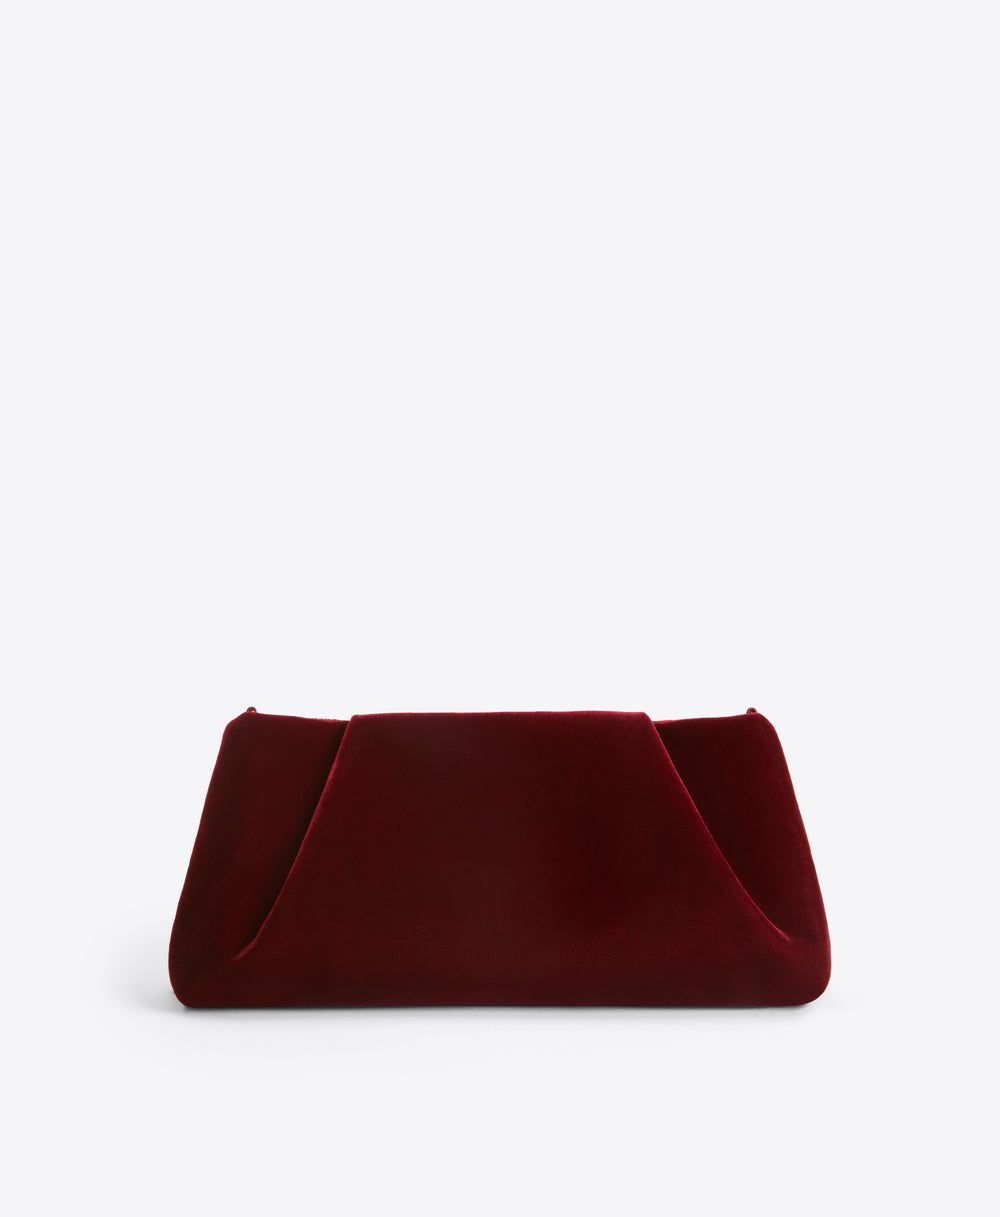 Vittoria Red Velvet Clutch Bag with Buckle Malone Souliers